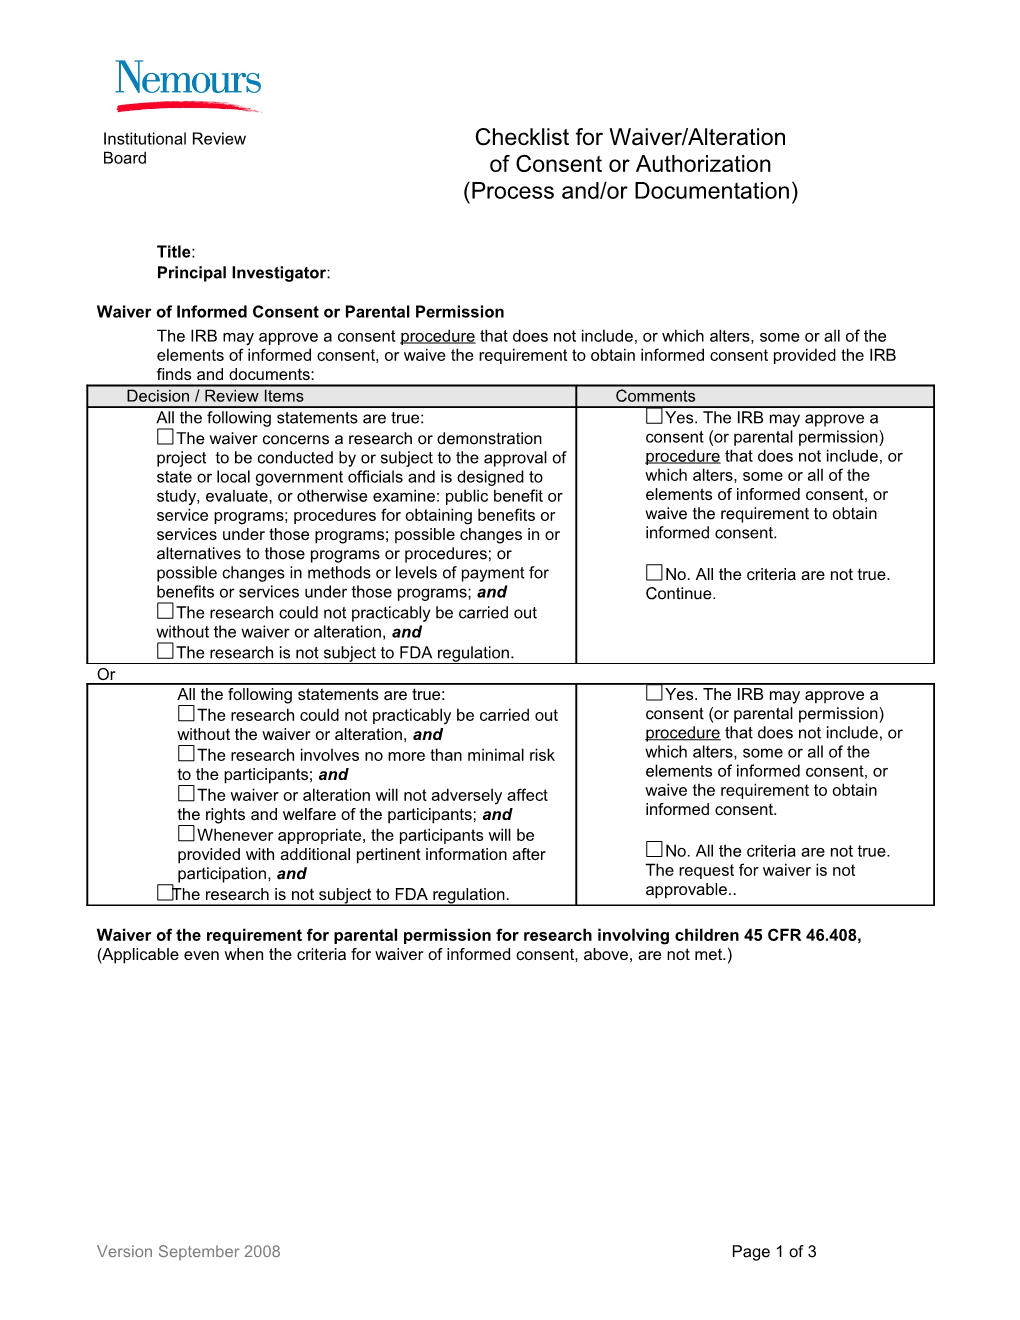 Waiver Or Alteration of the Consent Process 45 CFR 46